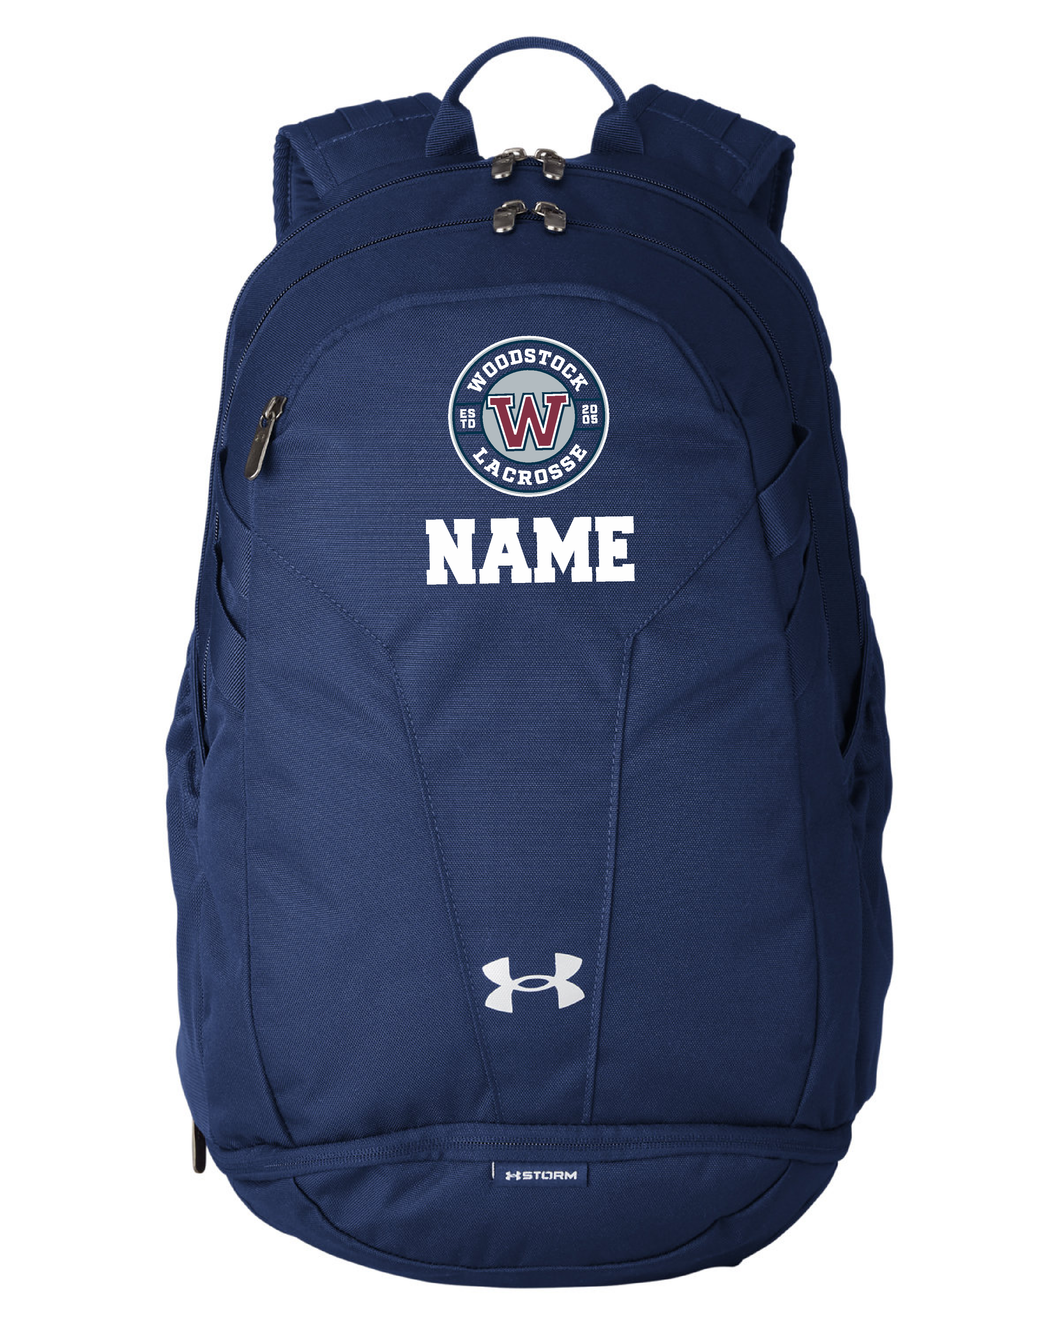 WW-LAX-976-2 - Under Armour Hustle 5.0 Team Backpack - Woodstock W LAX Logo & Personalized Name